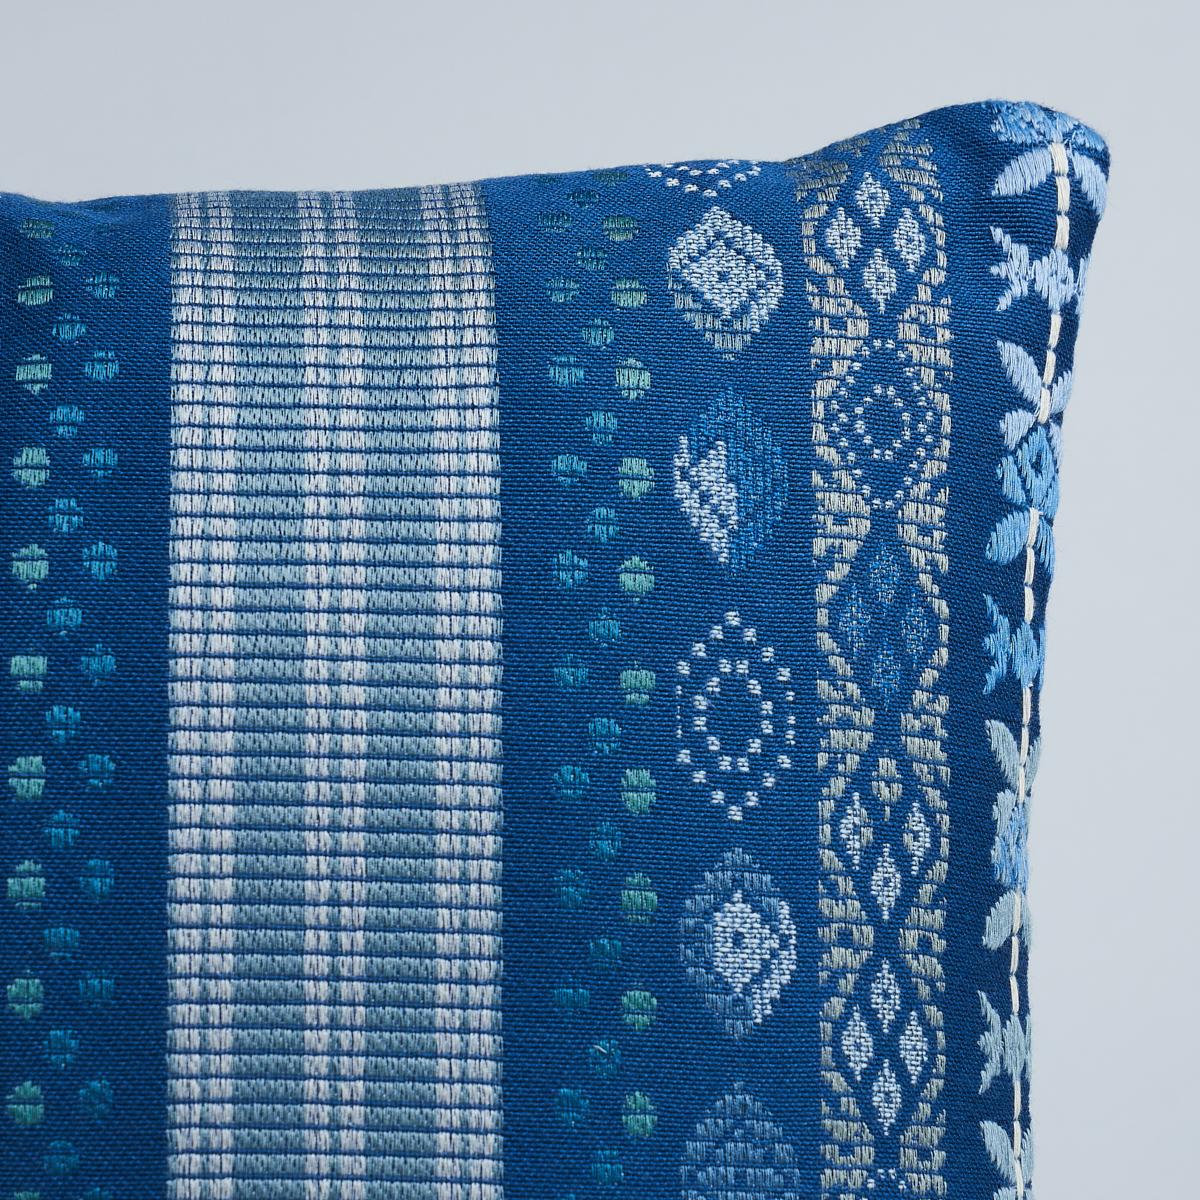 This pillow features Camden Cotton Check with a fringe finish. A classic one and a half-inch buffalo check, this woven cotton is a wonderful complement to both prints and plains. Pillow includes a feather/down fill insert and hidden zipper